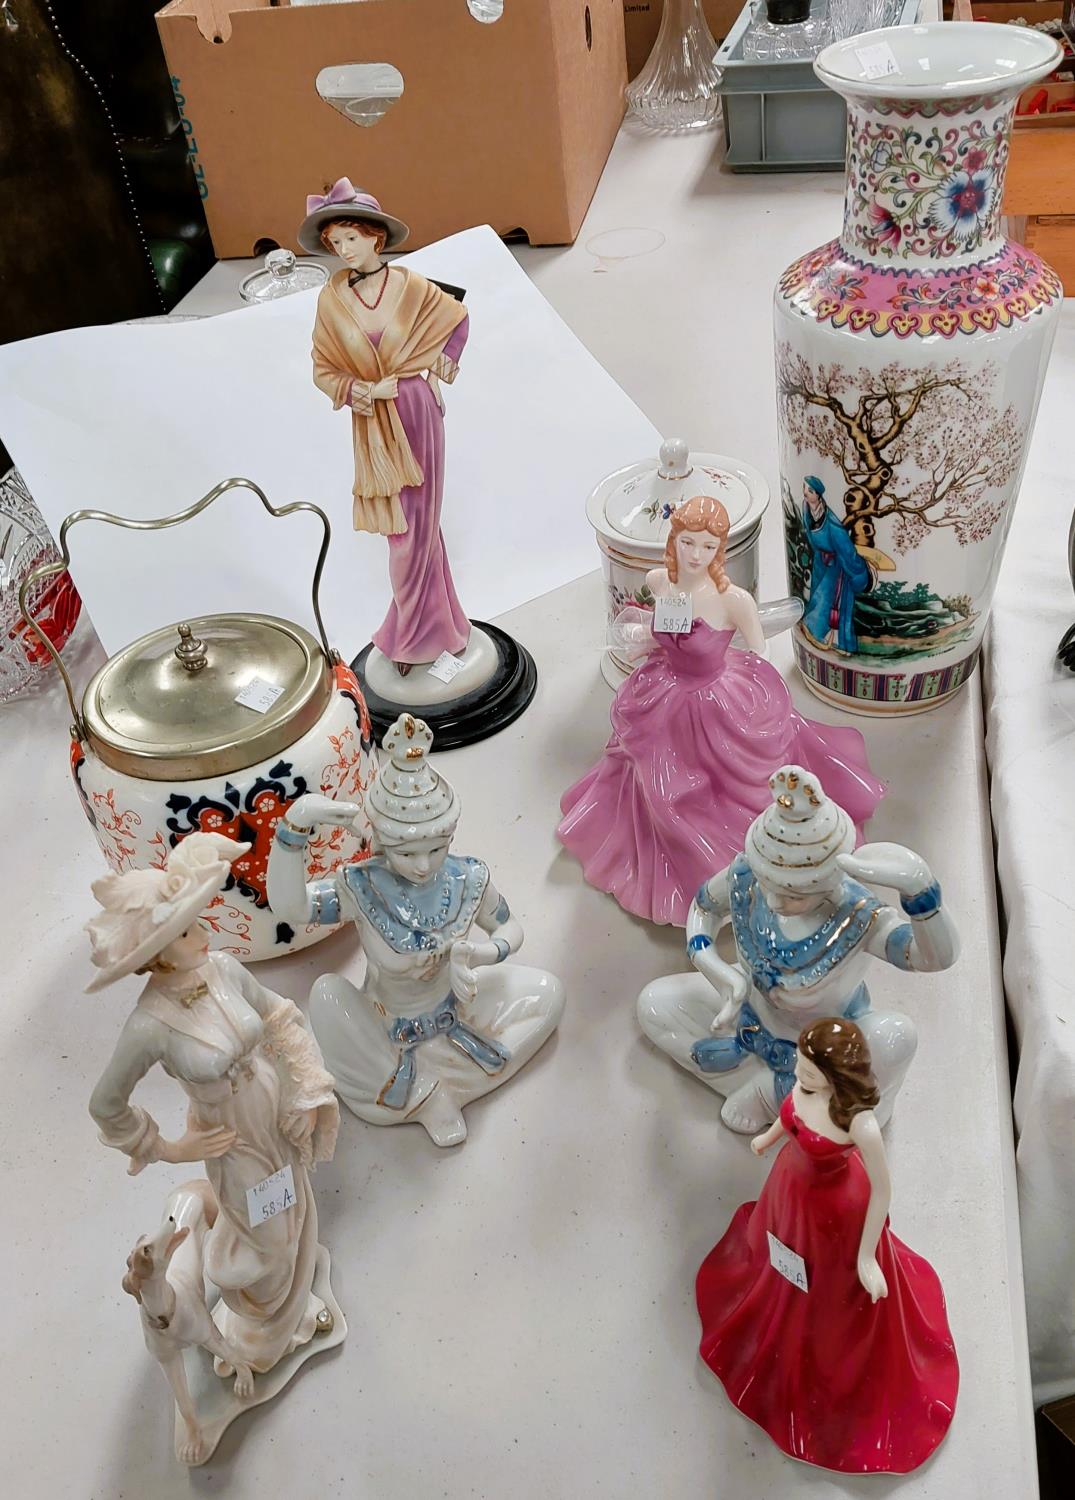 Two Royal Doulton figures "January" and "Victoria" (arm a.f); other figures and decorative pottery